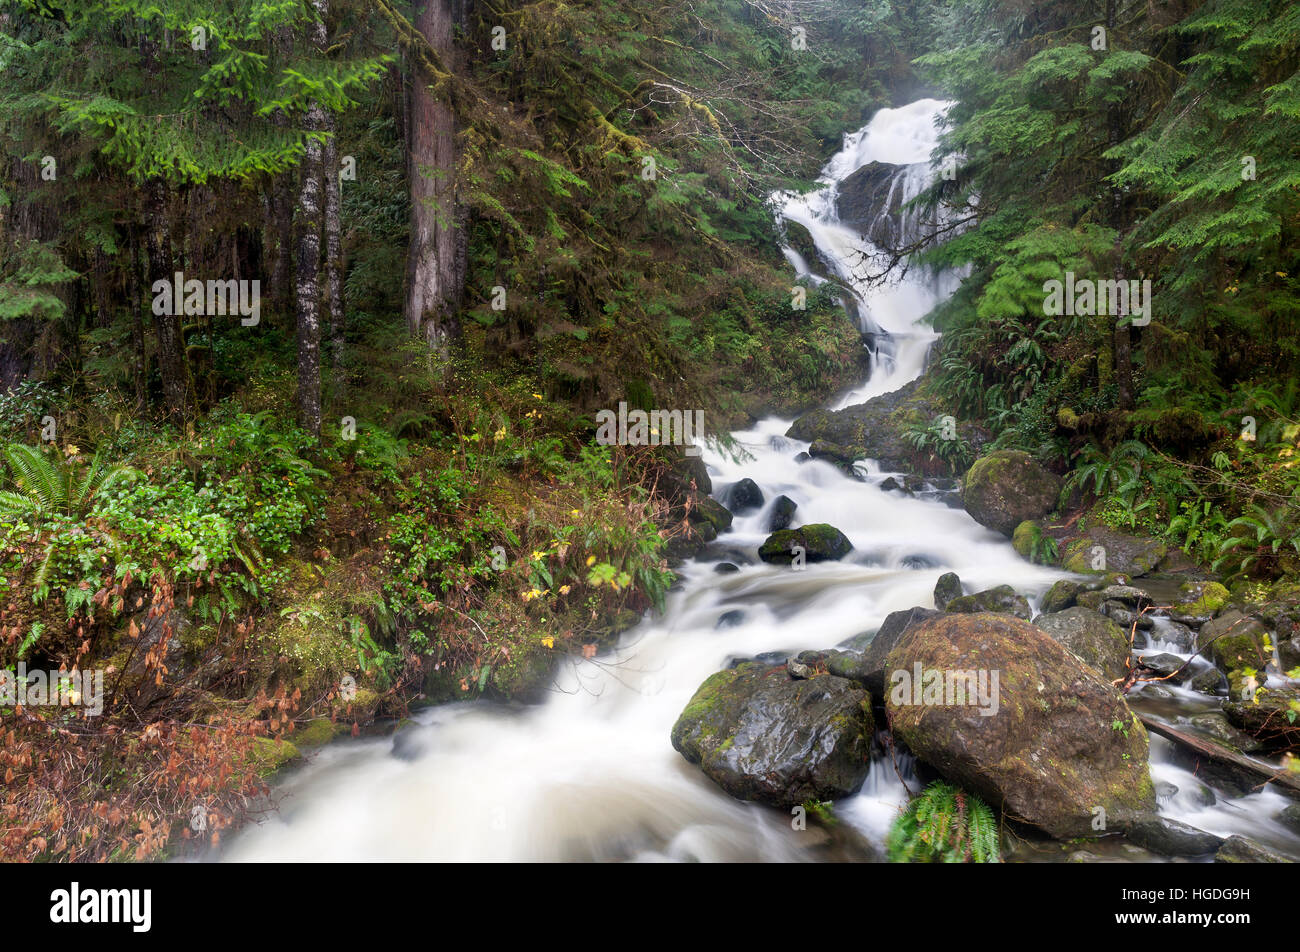 WA11978-00...WASHINGTON - Bunch Falls in the Quinault Valley of Olympic National Forest Stock Photo